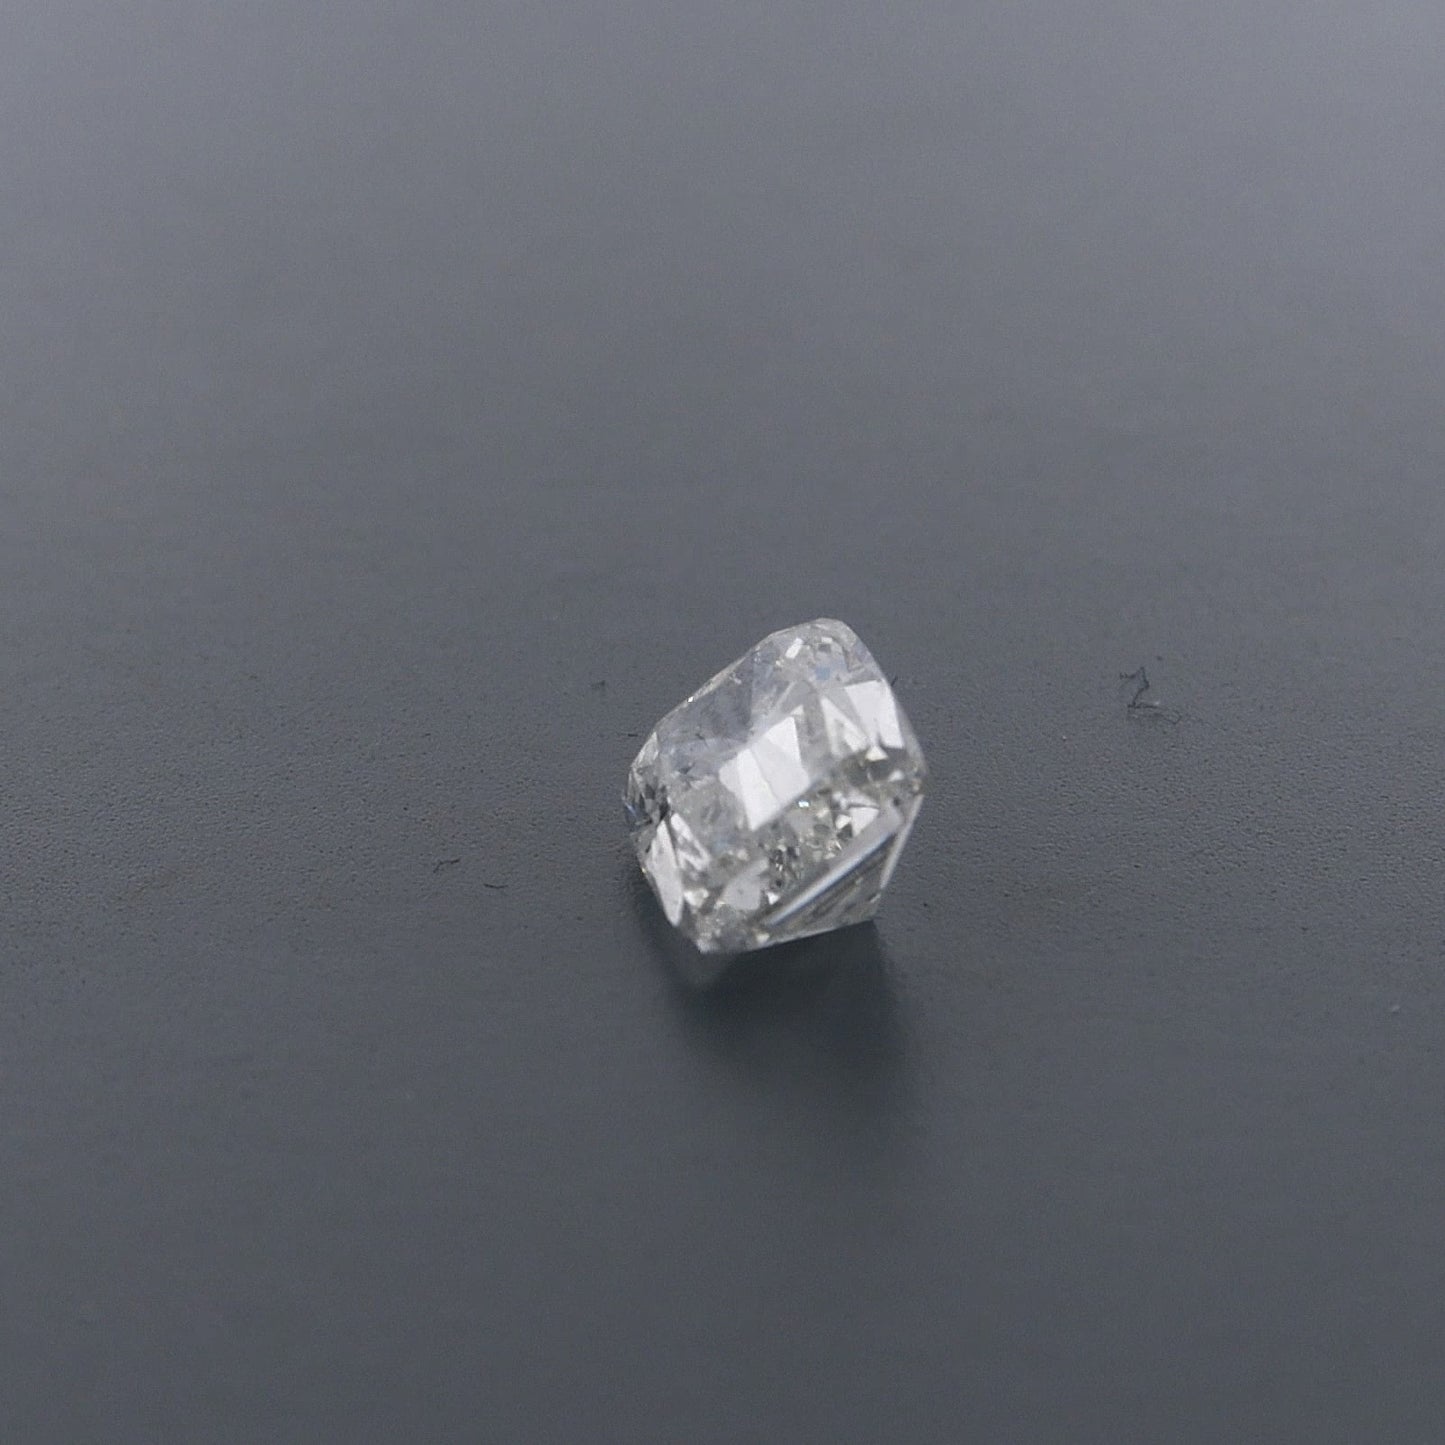 Elongated Cushion 1.56ct ISI2 Diamond with GIA Certification